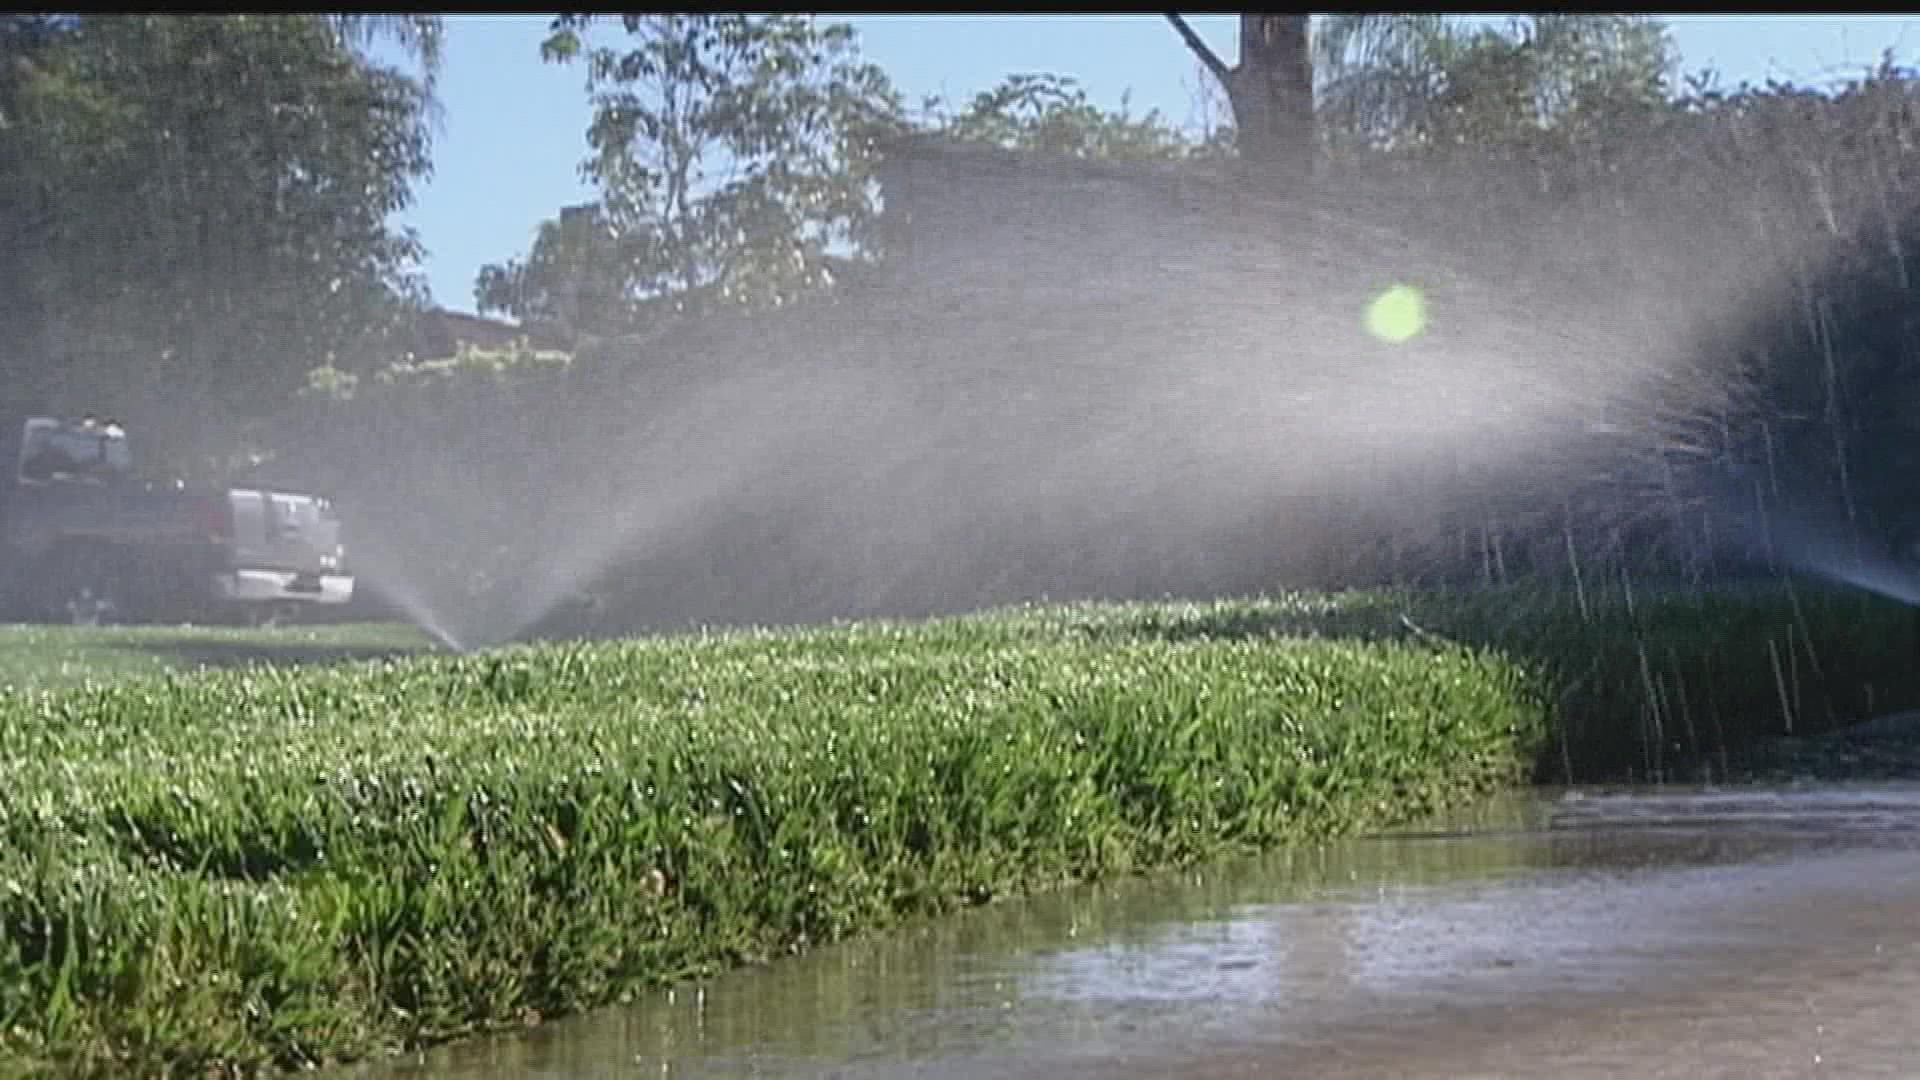 The potential water rate increase comes after the San Diego County water authority increased its rates. Now, the city will have cover additional costs.